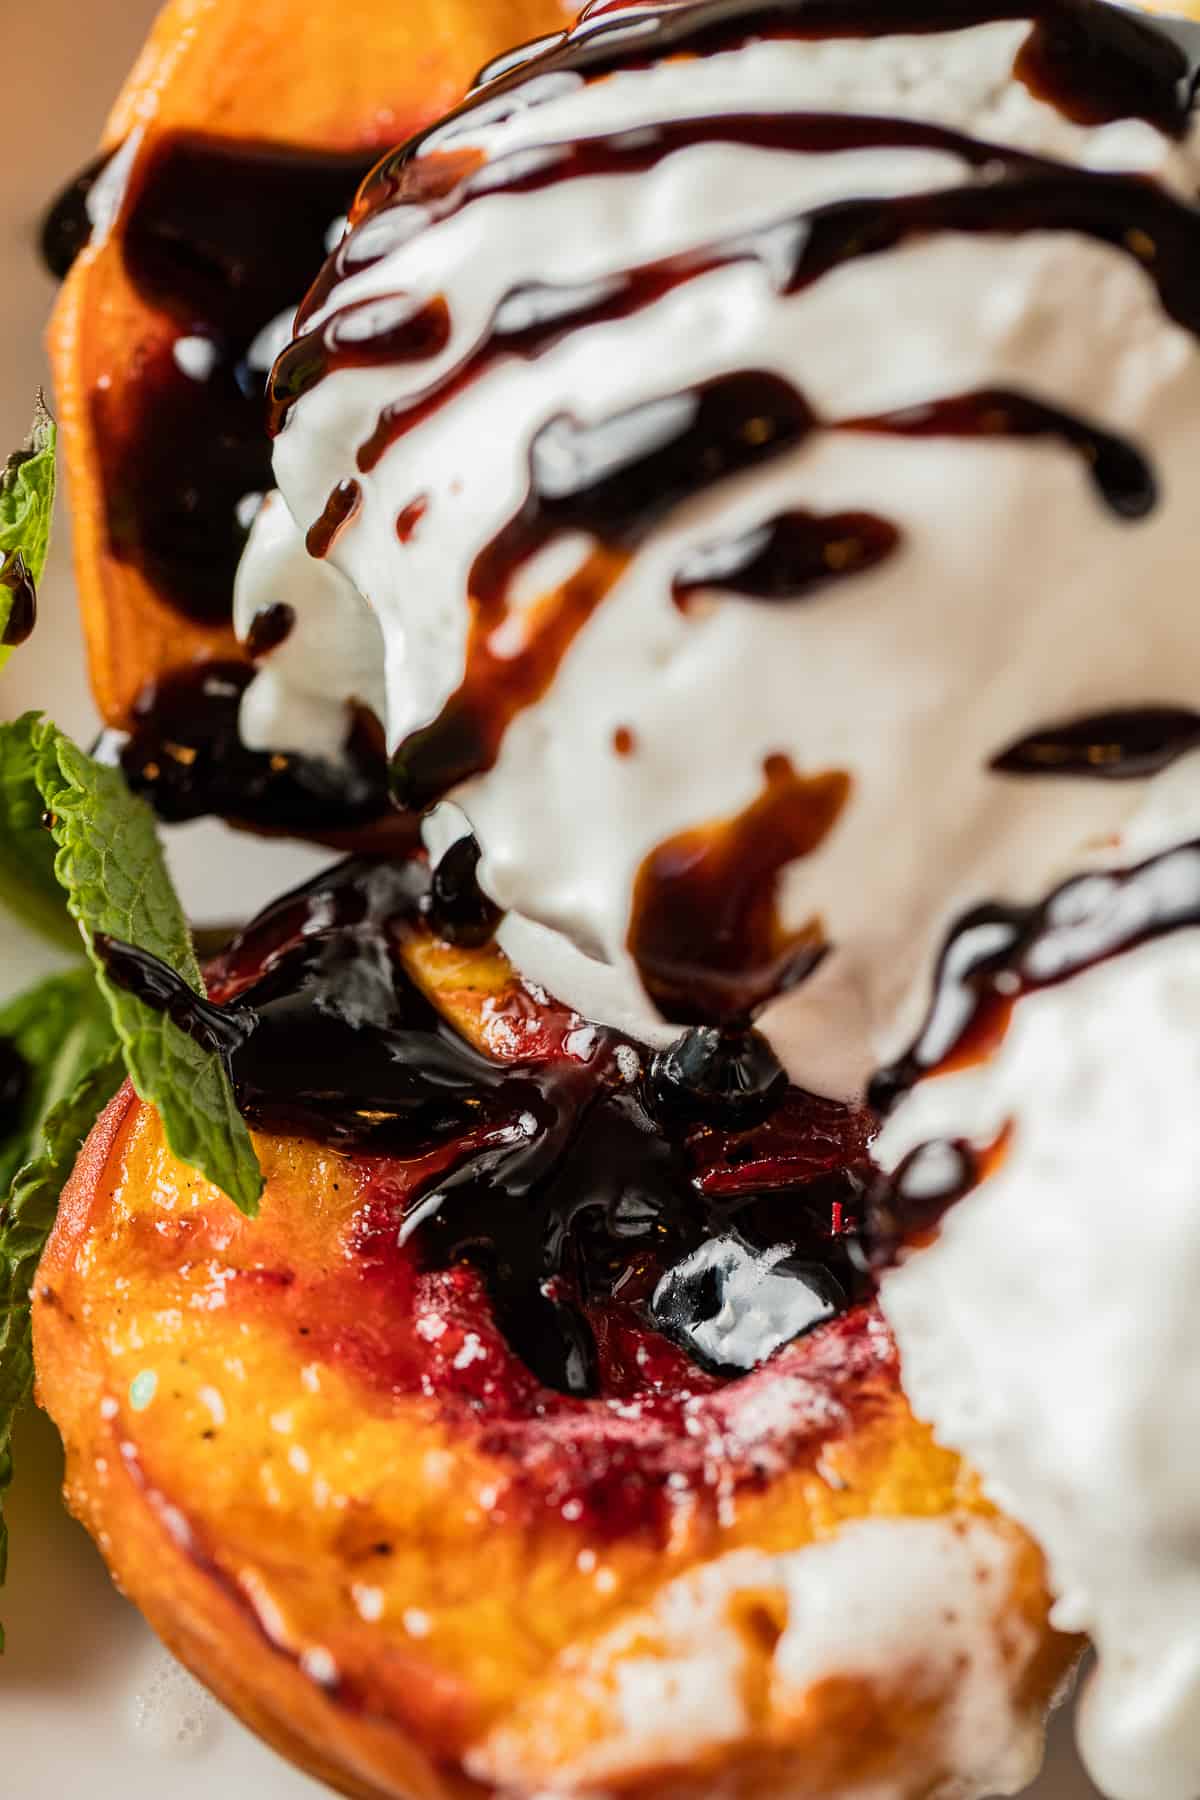 Smoked peaches topped with vanilla ice cream and balsamic glaze.